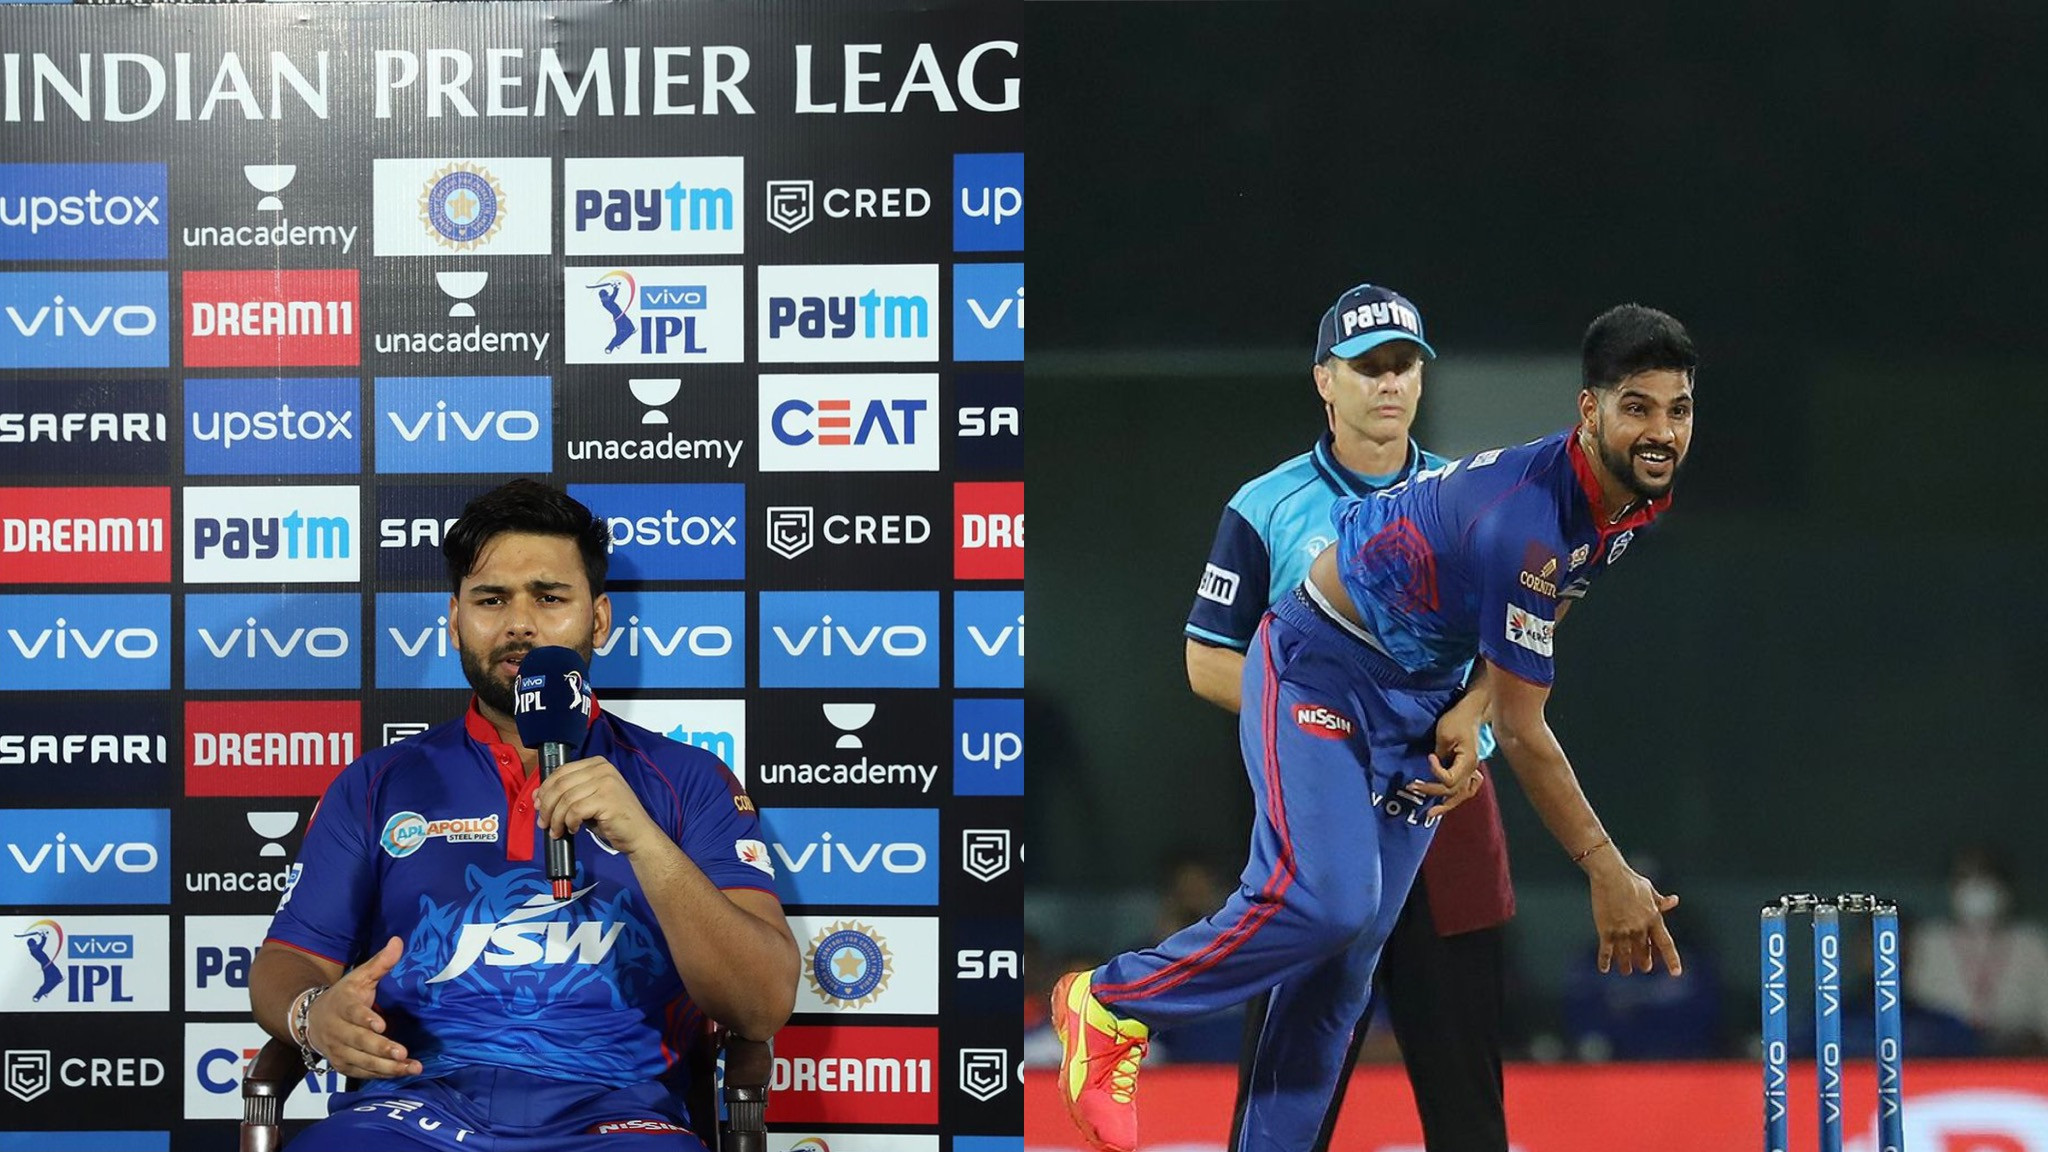 IPL 2021: Lalit Yadav is a great player and we're looking to groom him, says DC skipper Rishabh Pant